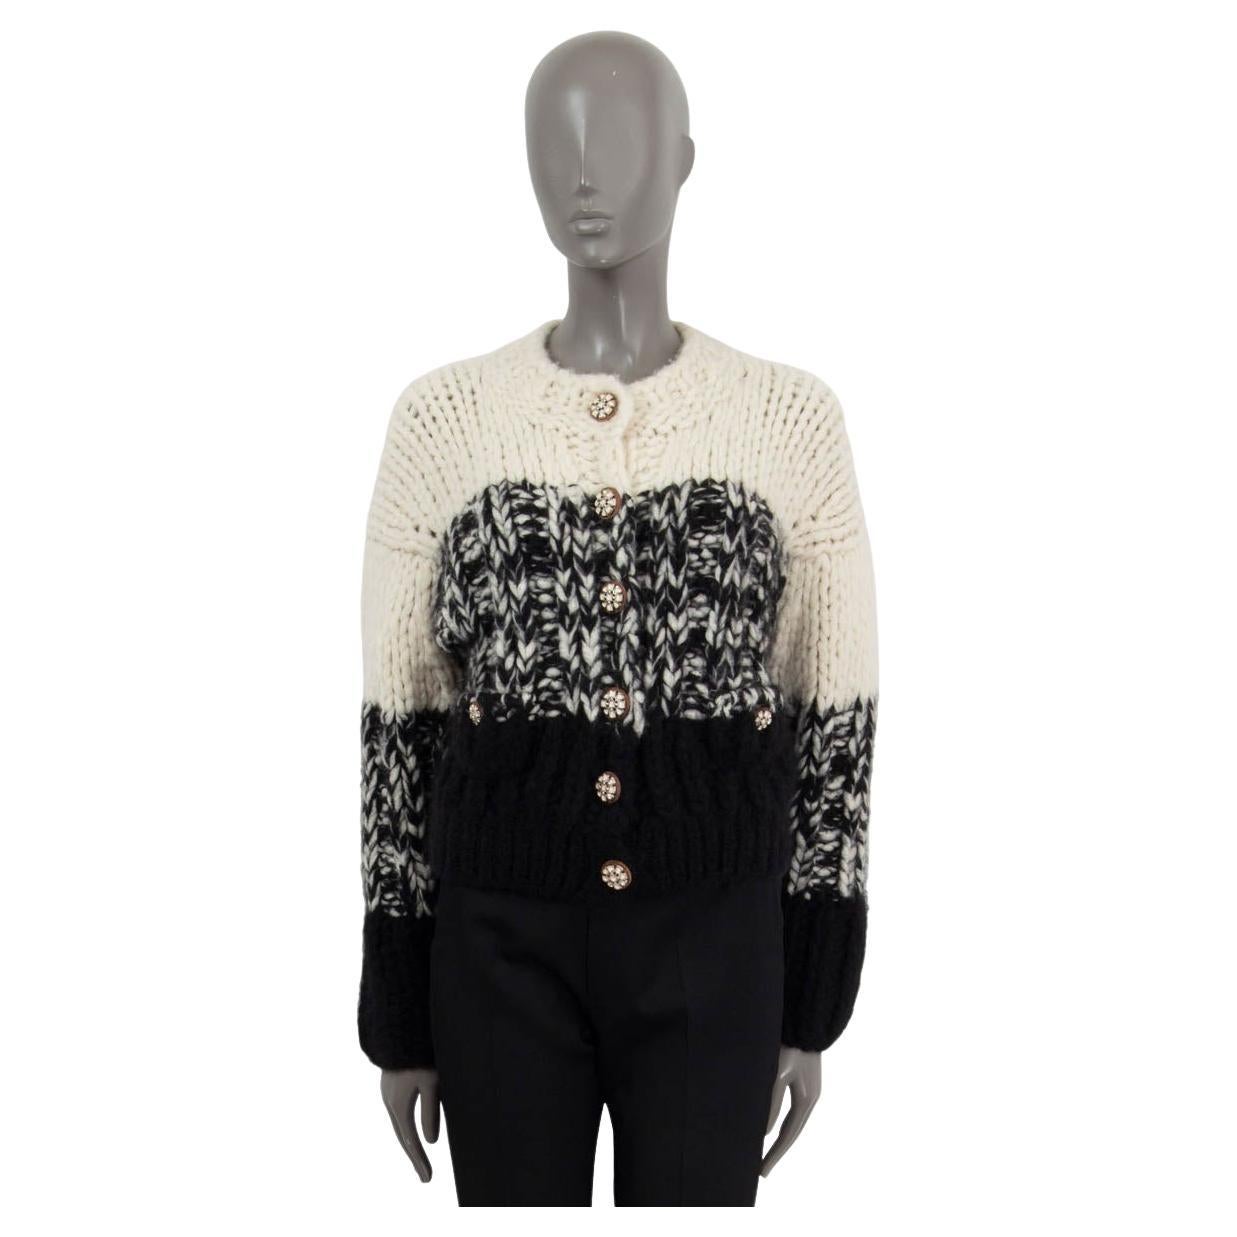 CHANEL black & white cashmere 2019 CHUNKY Cardigan Sweater 38 S 19K